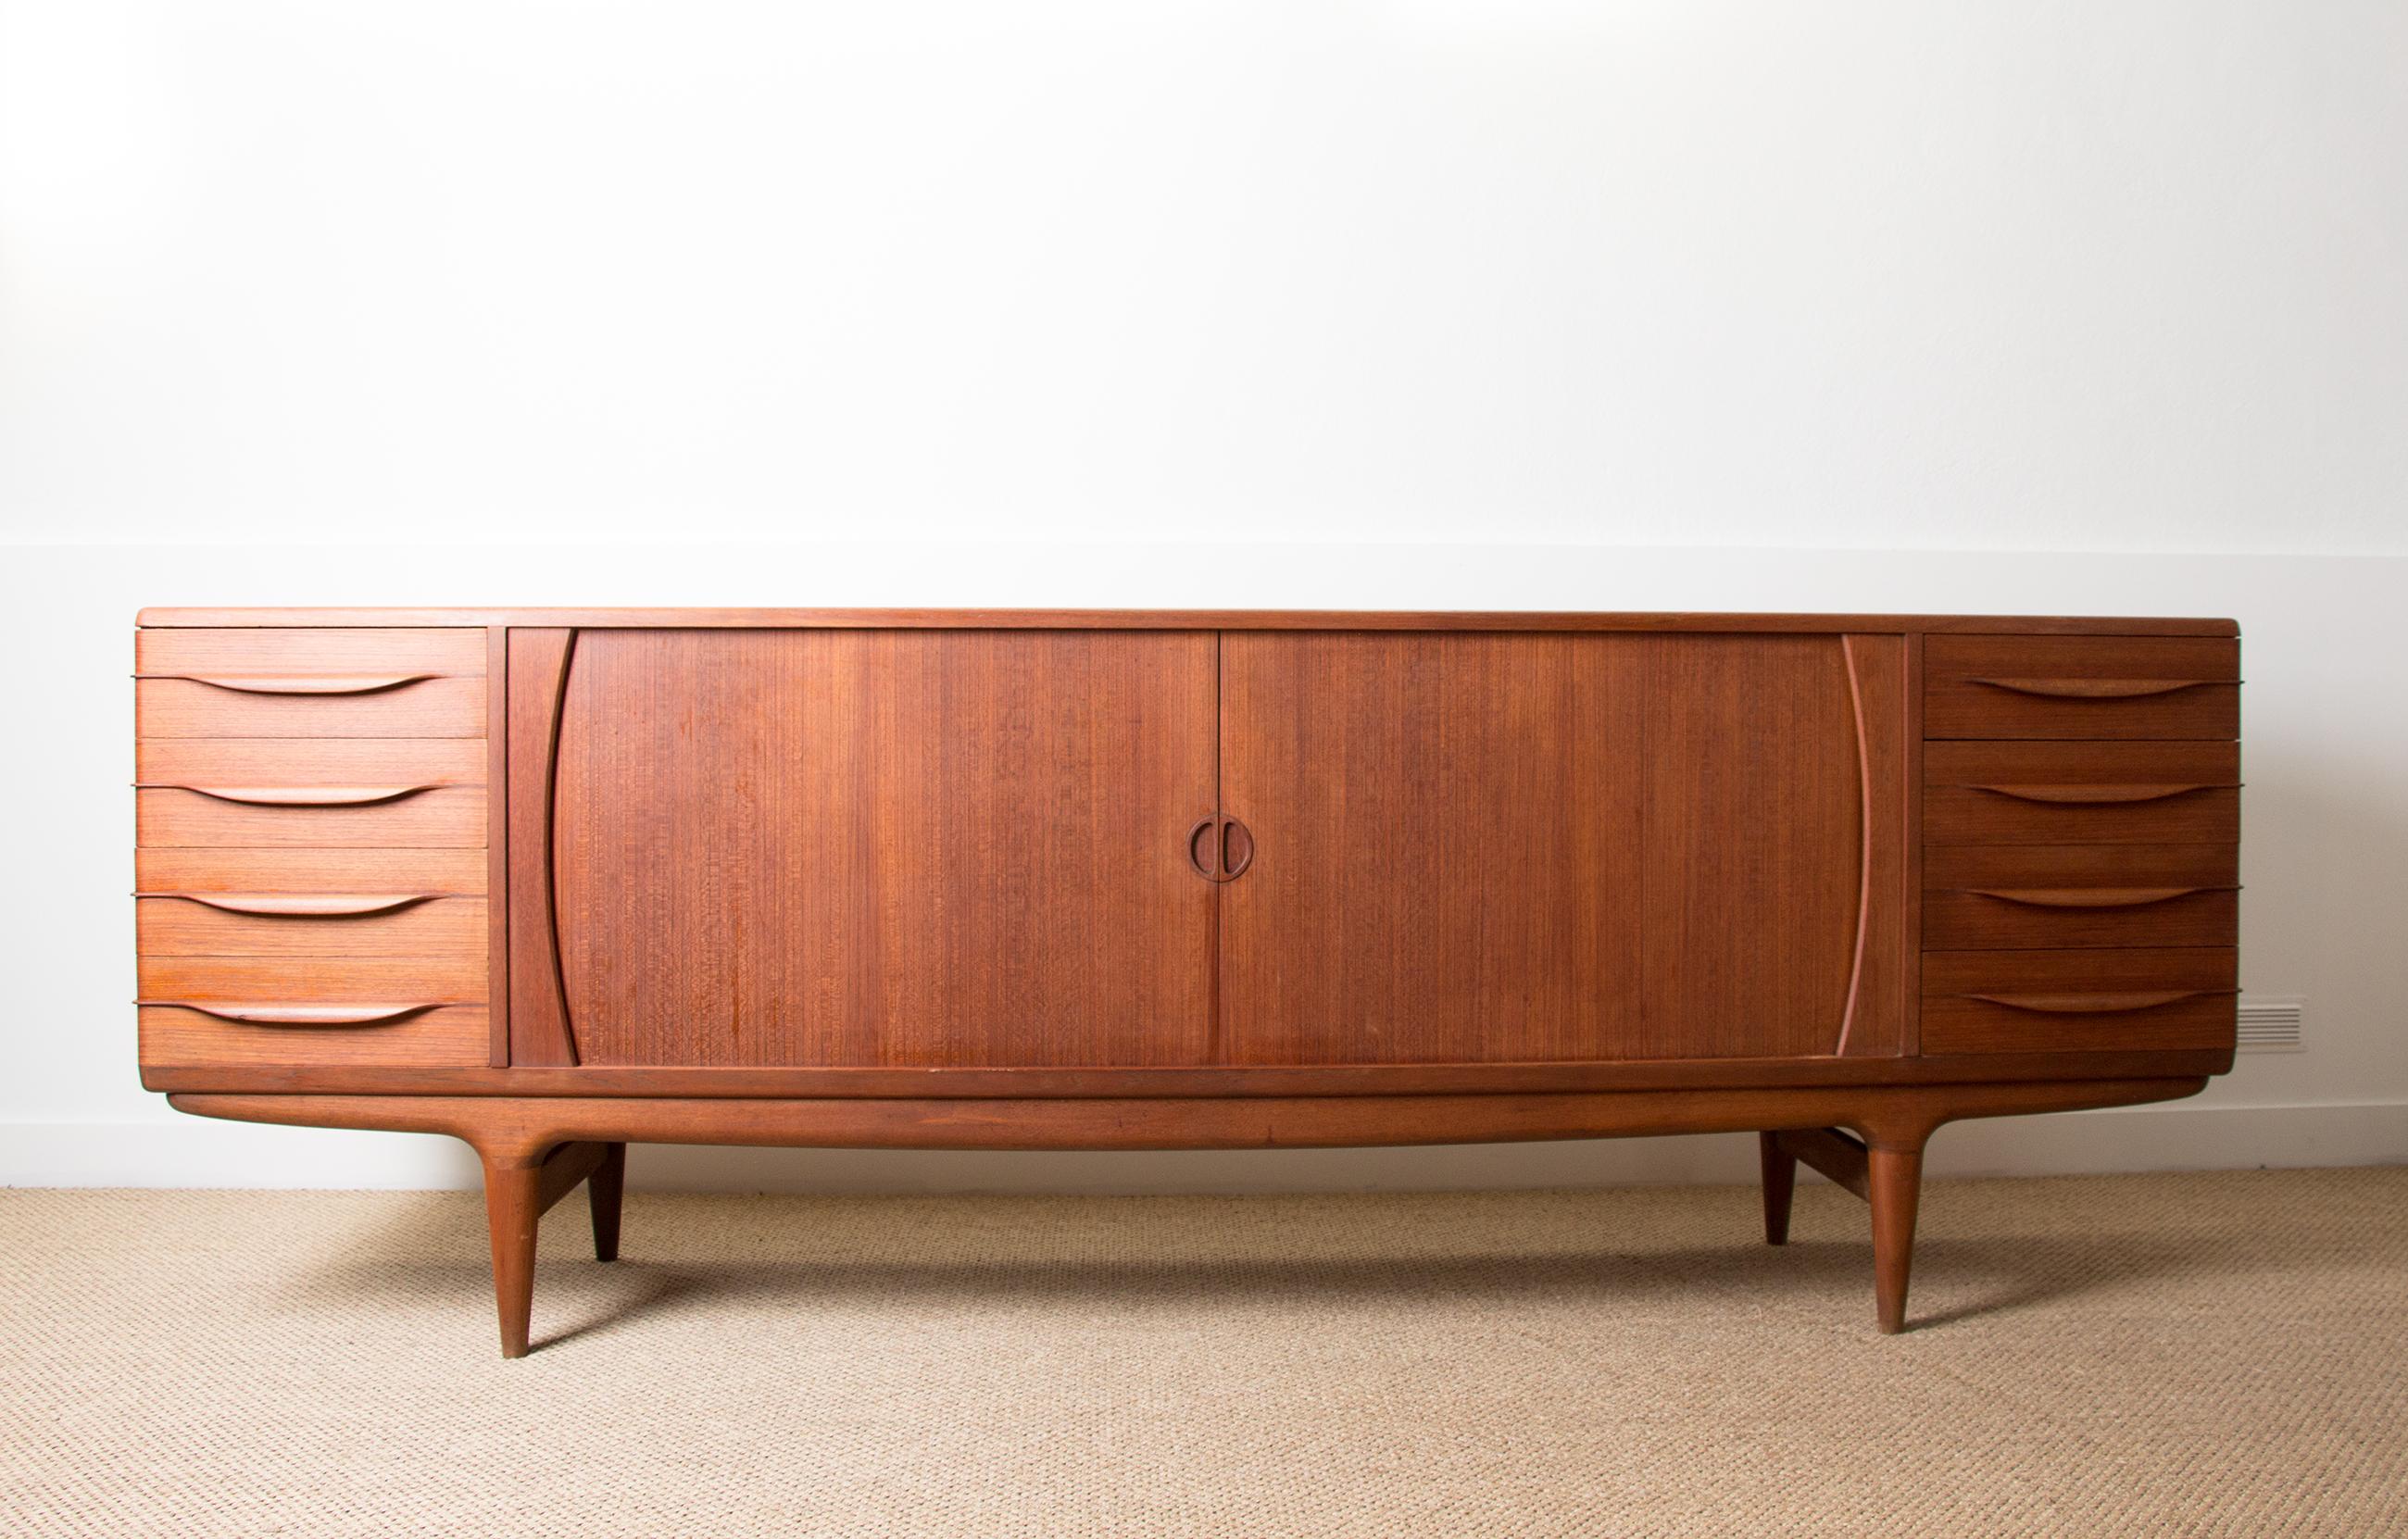 Superb Scandinavian sideboard made up of 2 x 4 drawers (with a cutlery under drawer on the top drawer) on the sides and two large curtain doors which open onto 4 shelves. Iconic piece of furniture by this Designer referenced at the Design Museum